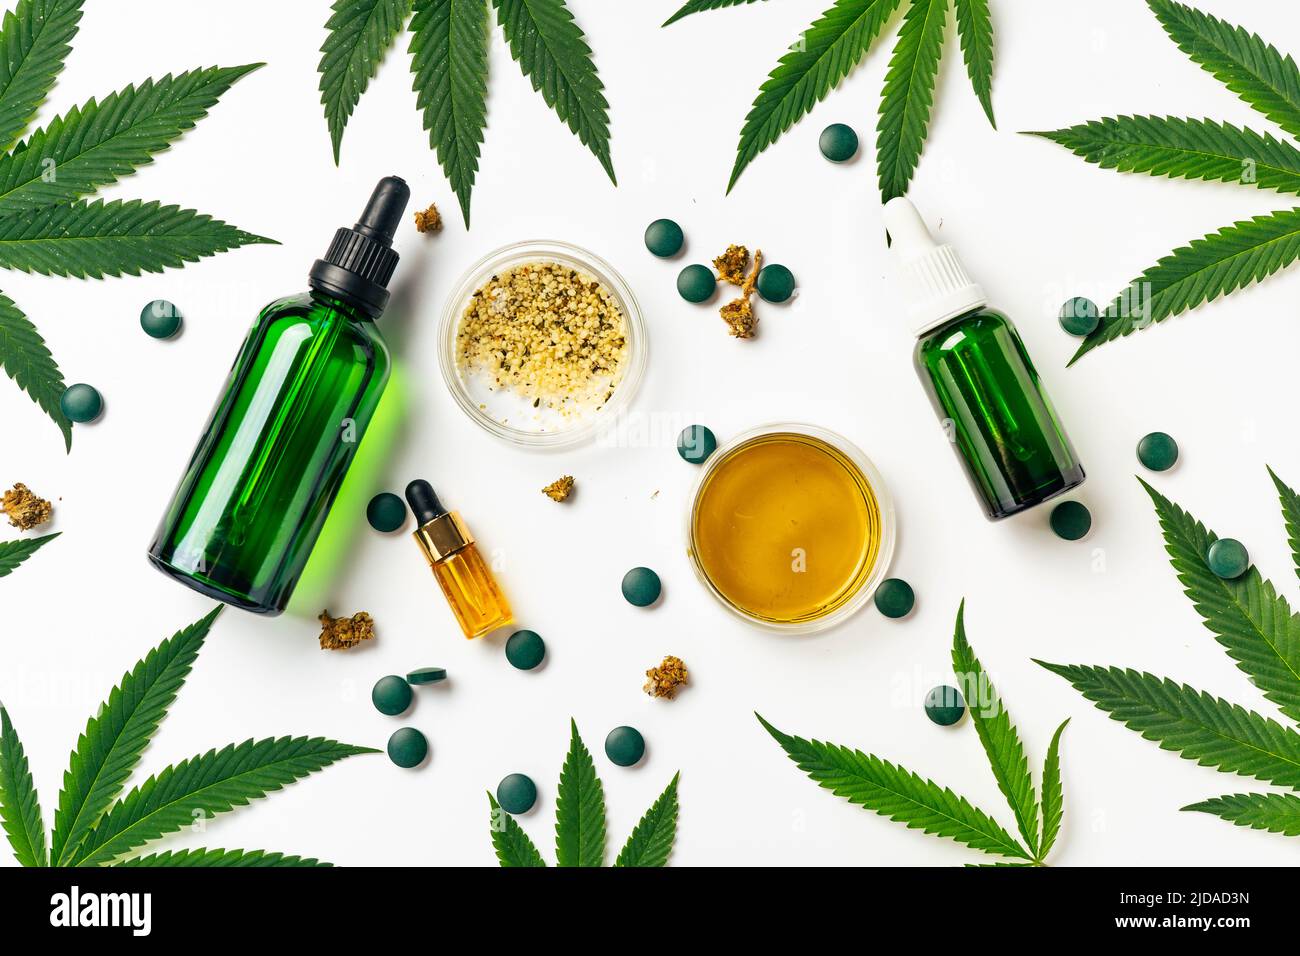 Science, Safety, Research, Technology with Cannabis. Legal, Medical and Recreational Use of Marijuana. Natural cosmetics or superfood, omega fats Stock Photo